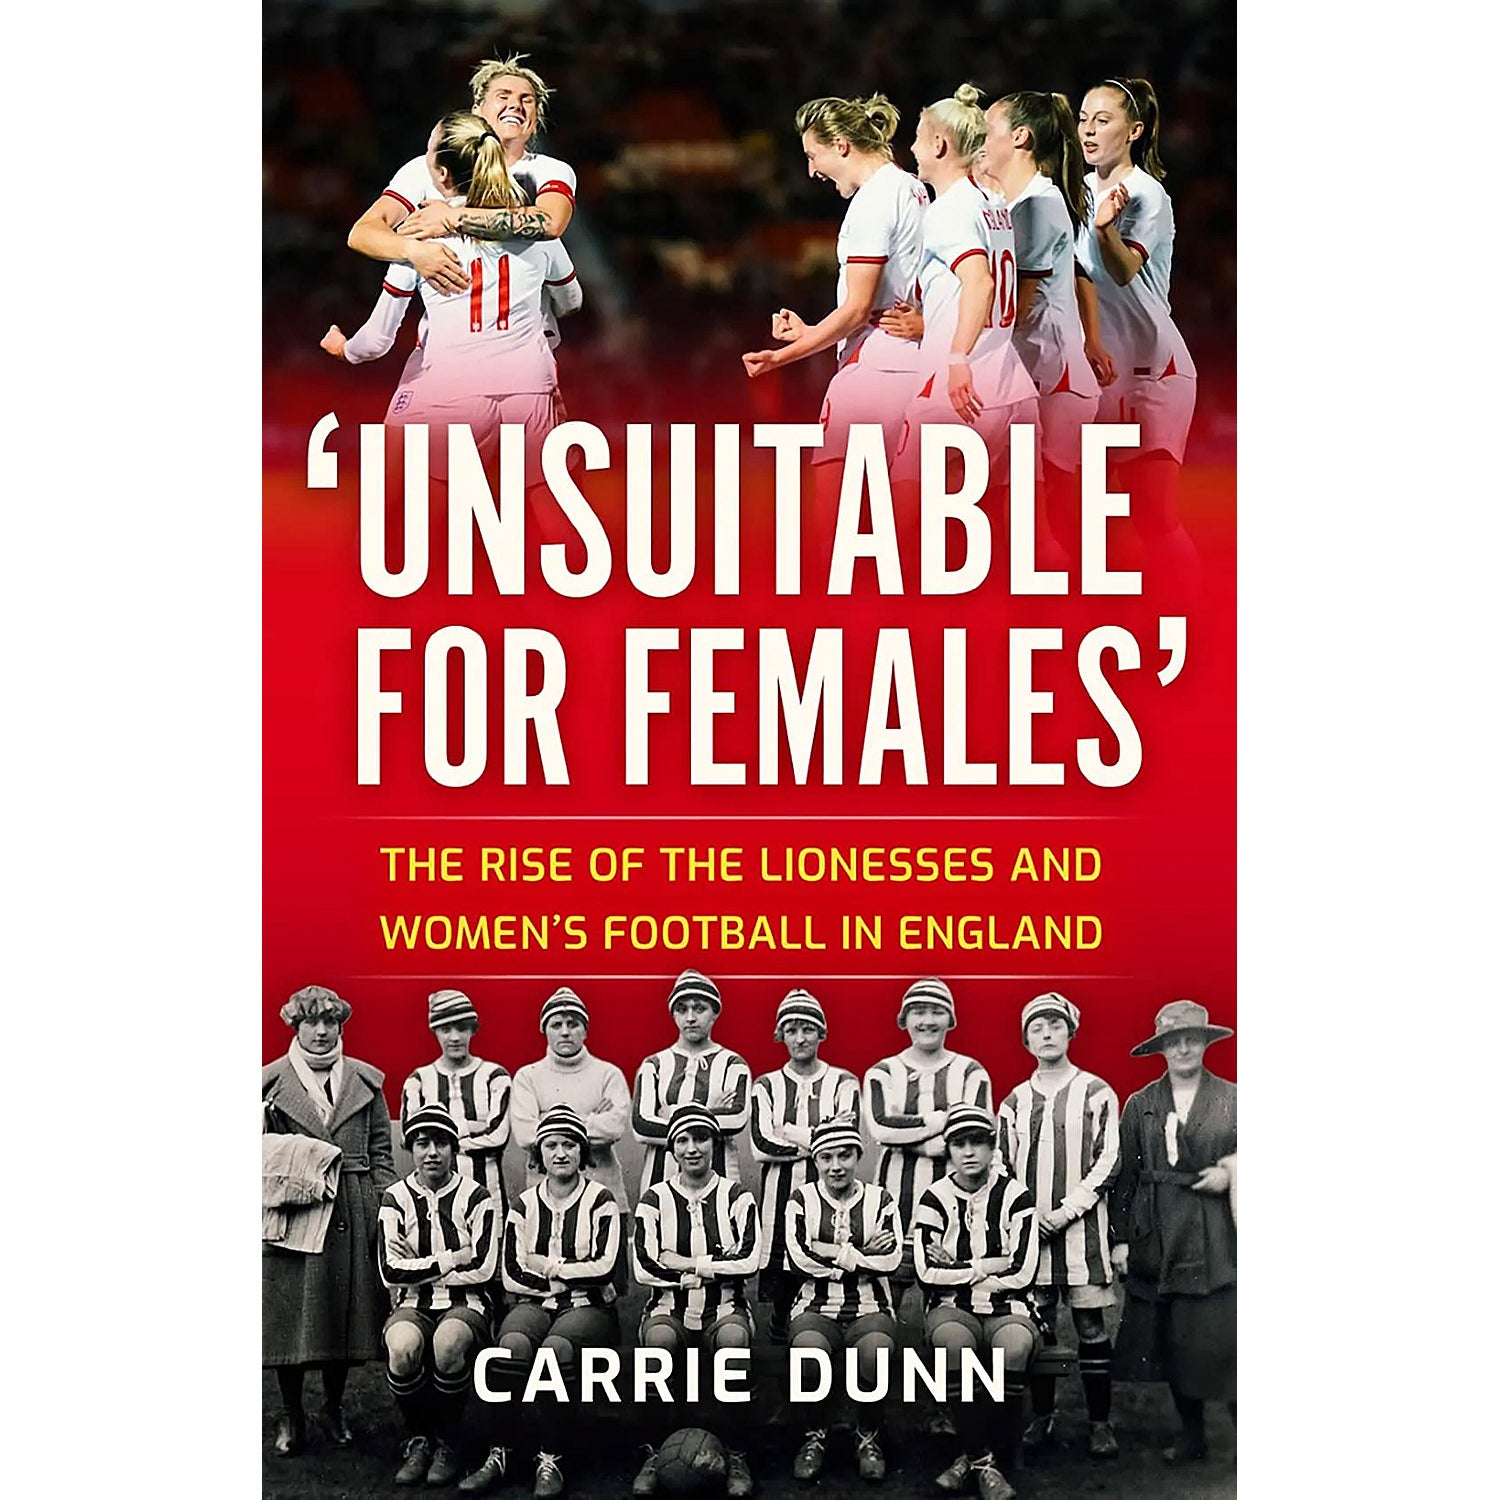 Unsuitable For Females – The Rise of the Lionesses and Women's Football in England